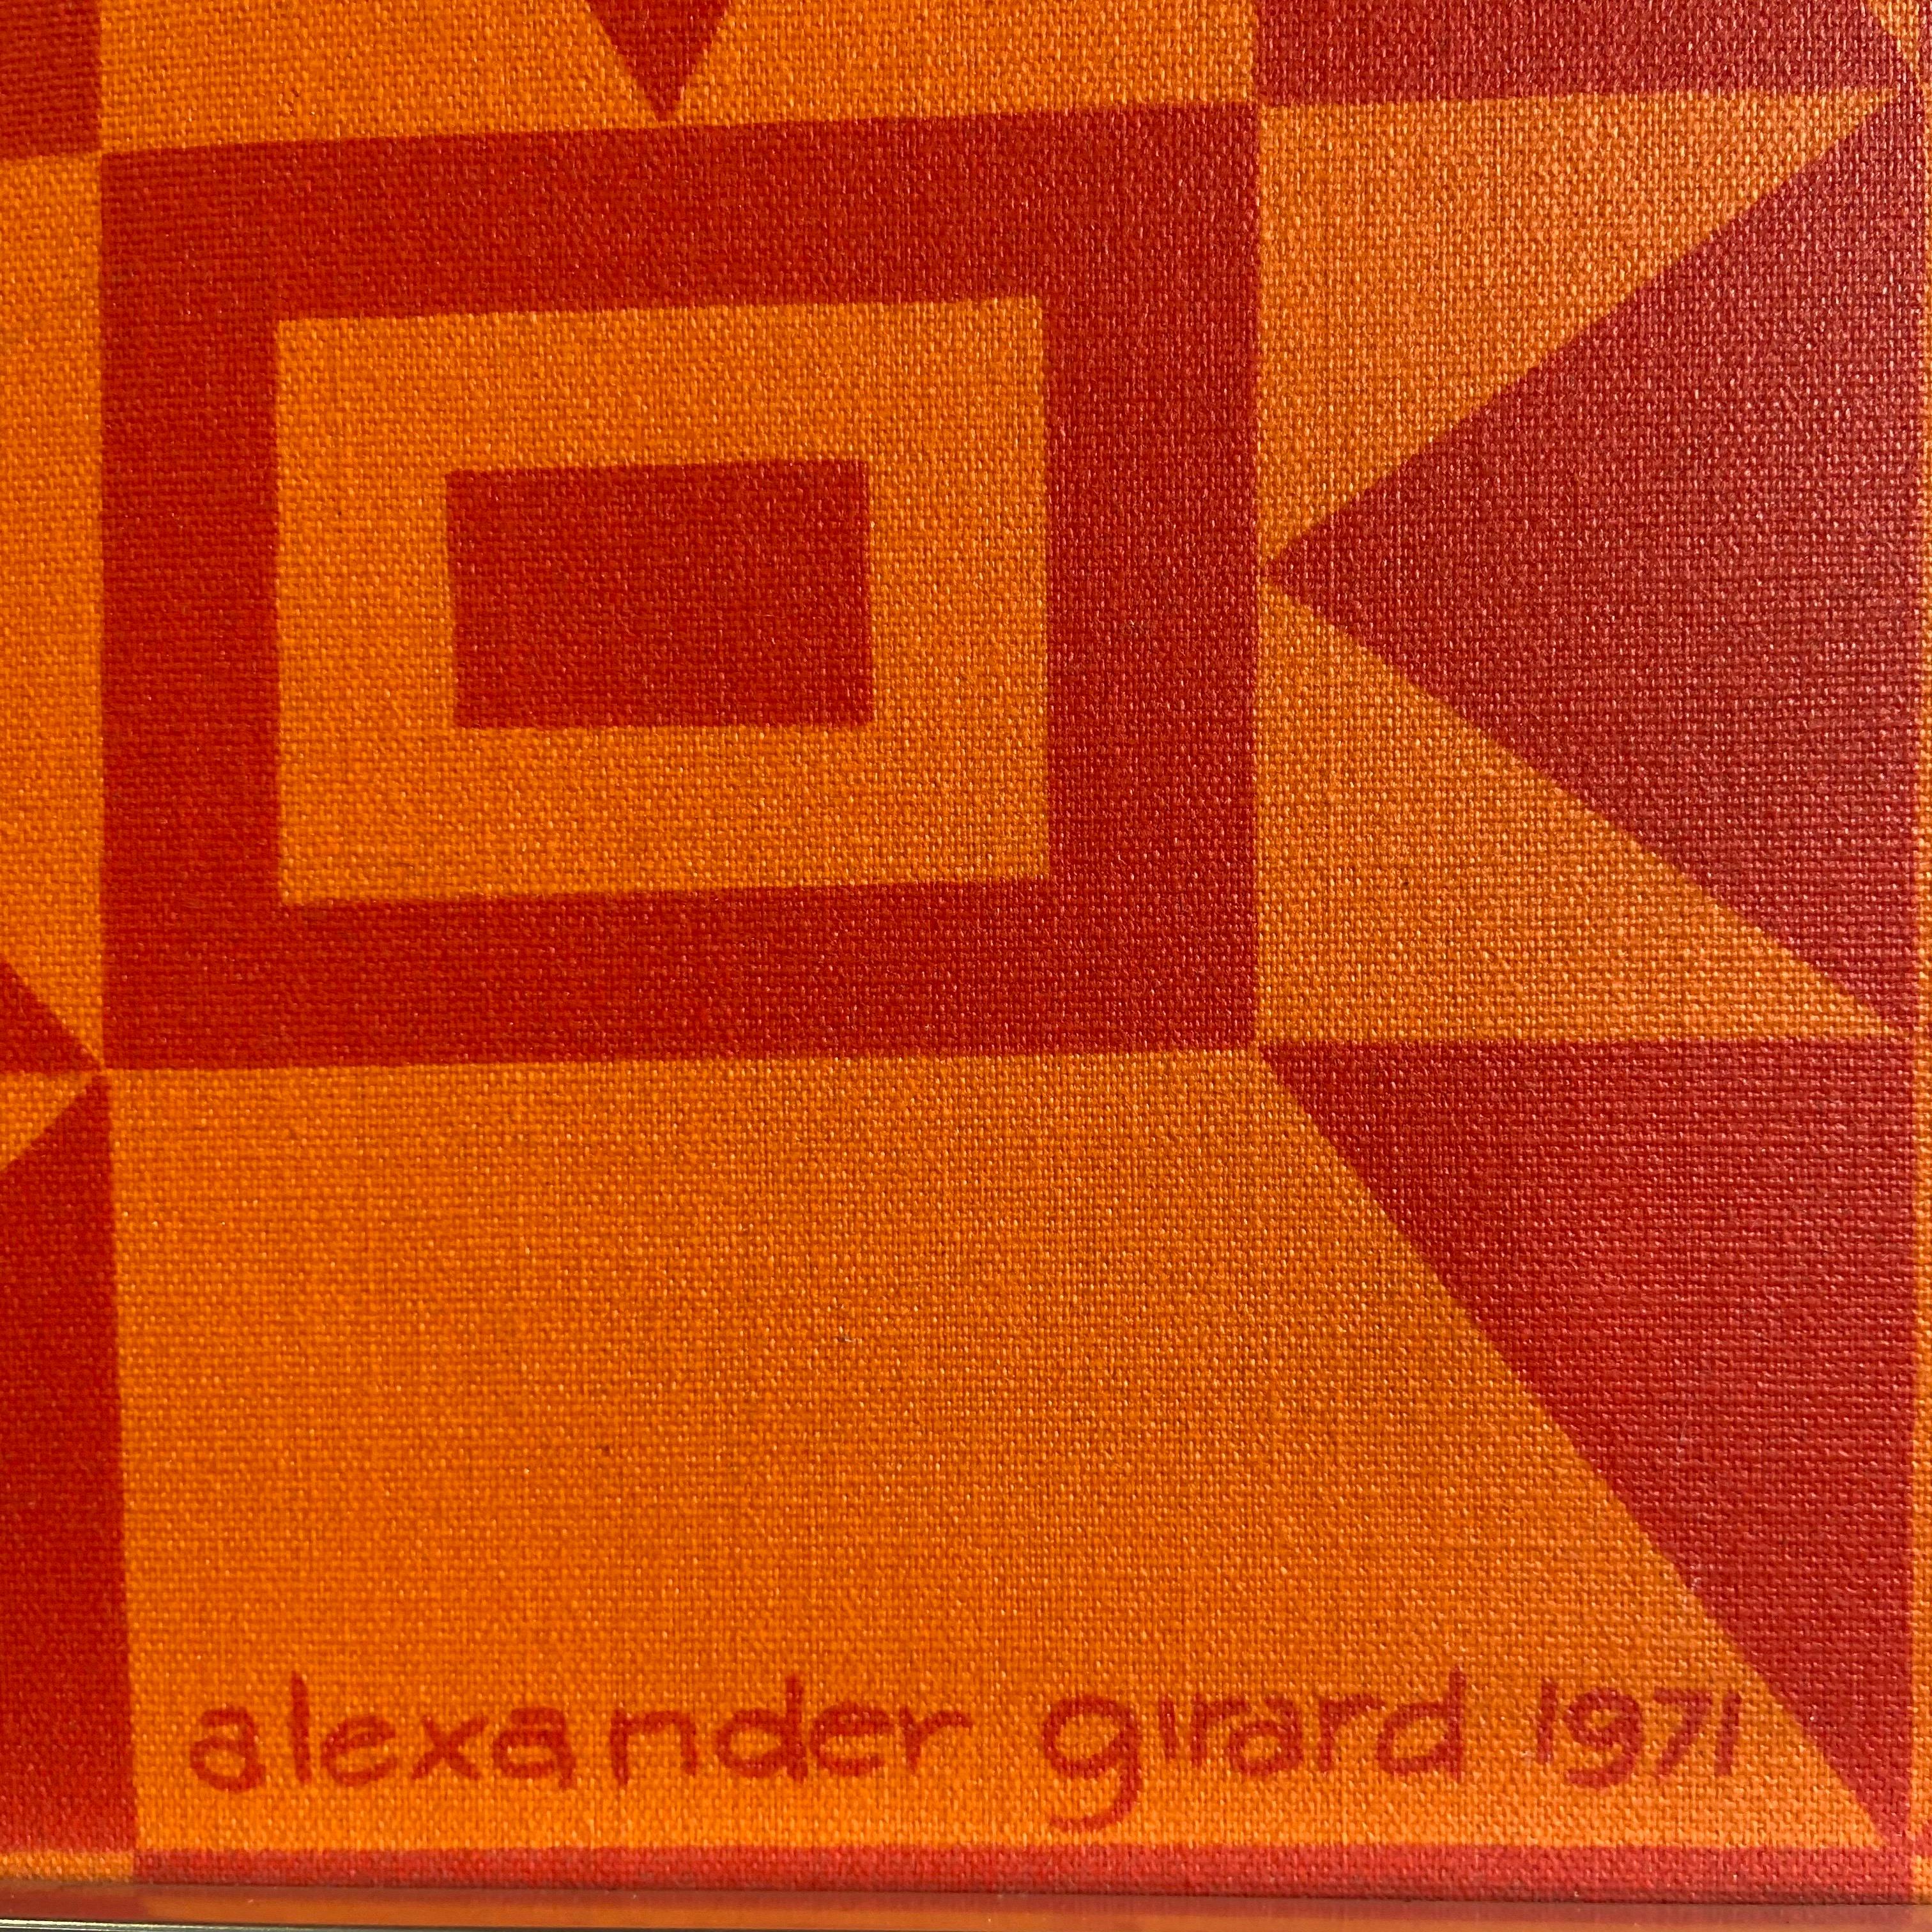 “Geometry” environmental enrichment panel by Alexander Girard, 1971. This is an original piece designed by Girard for Herman Miller. Showing very little wear and period framed by Tom Tru Co Lambertville NJ.